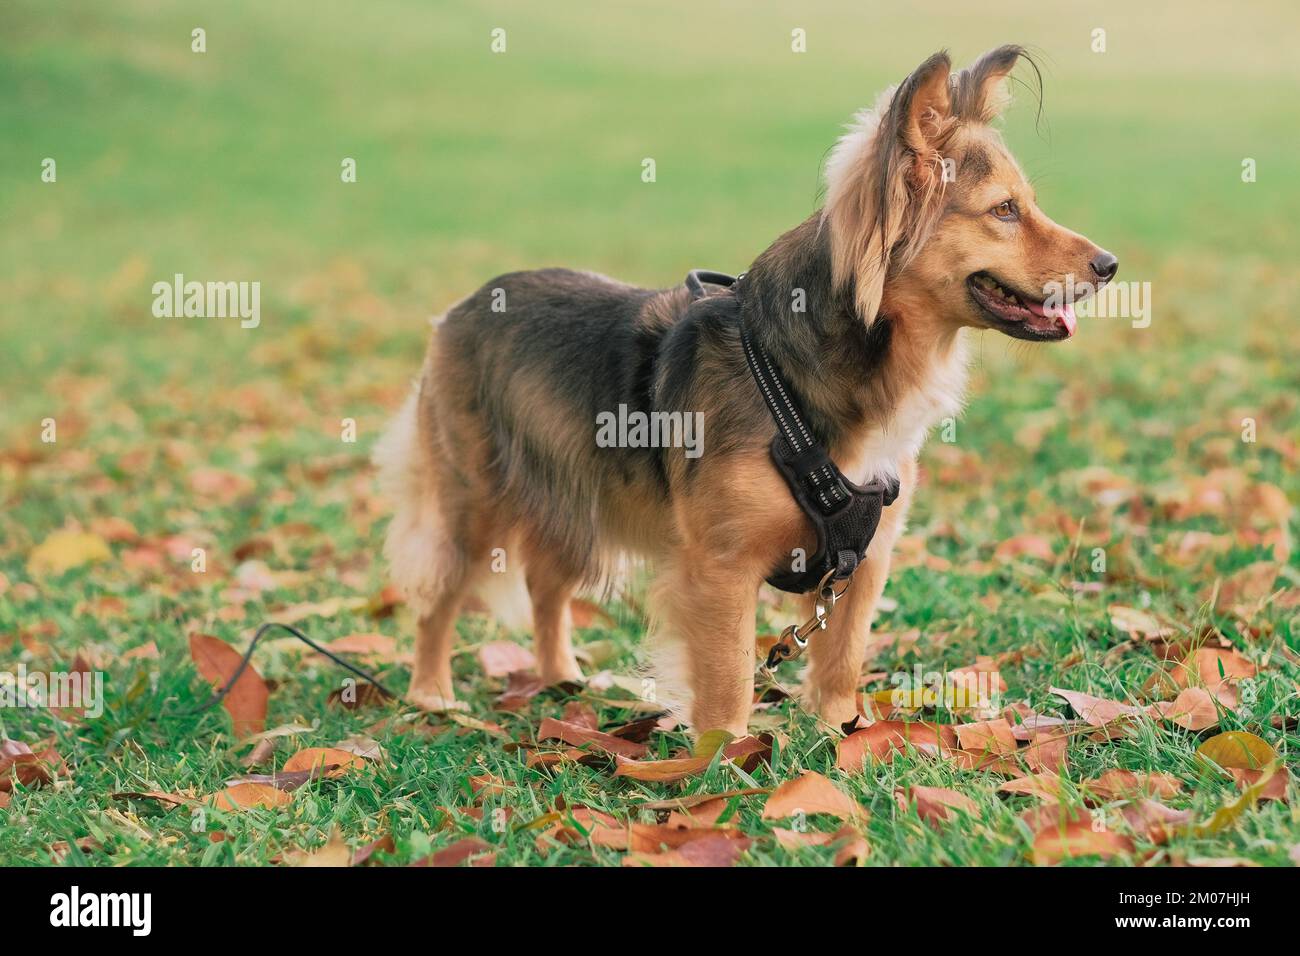 Mixed-breed multicolor dog with harness outdoor. Animal fur black, brown, white. Medium-sized pet in park. Grass green, leaves orange, Autumn day. Stock Photo